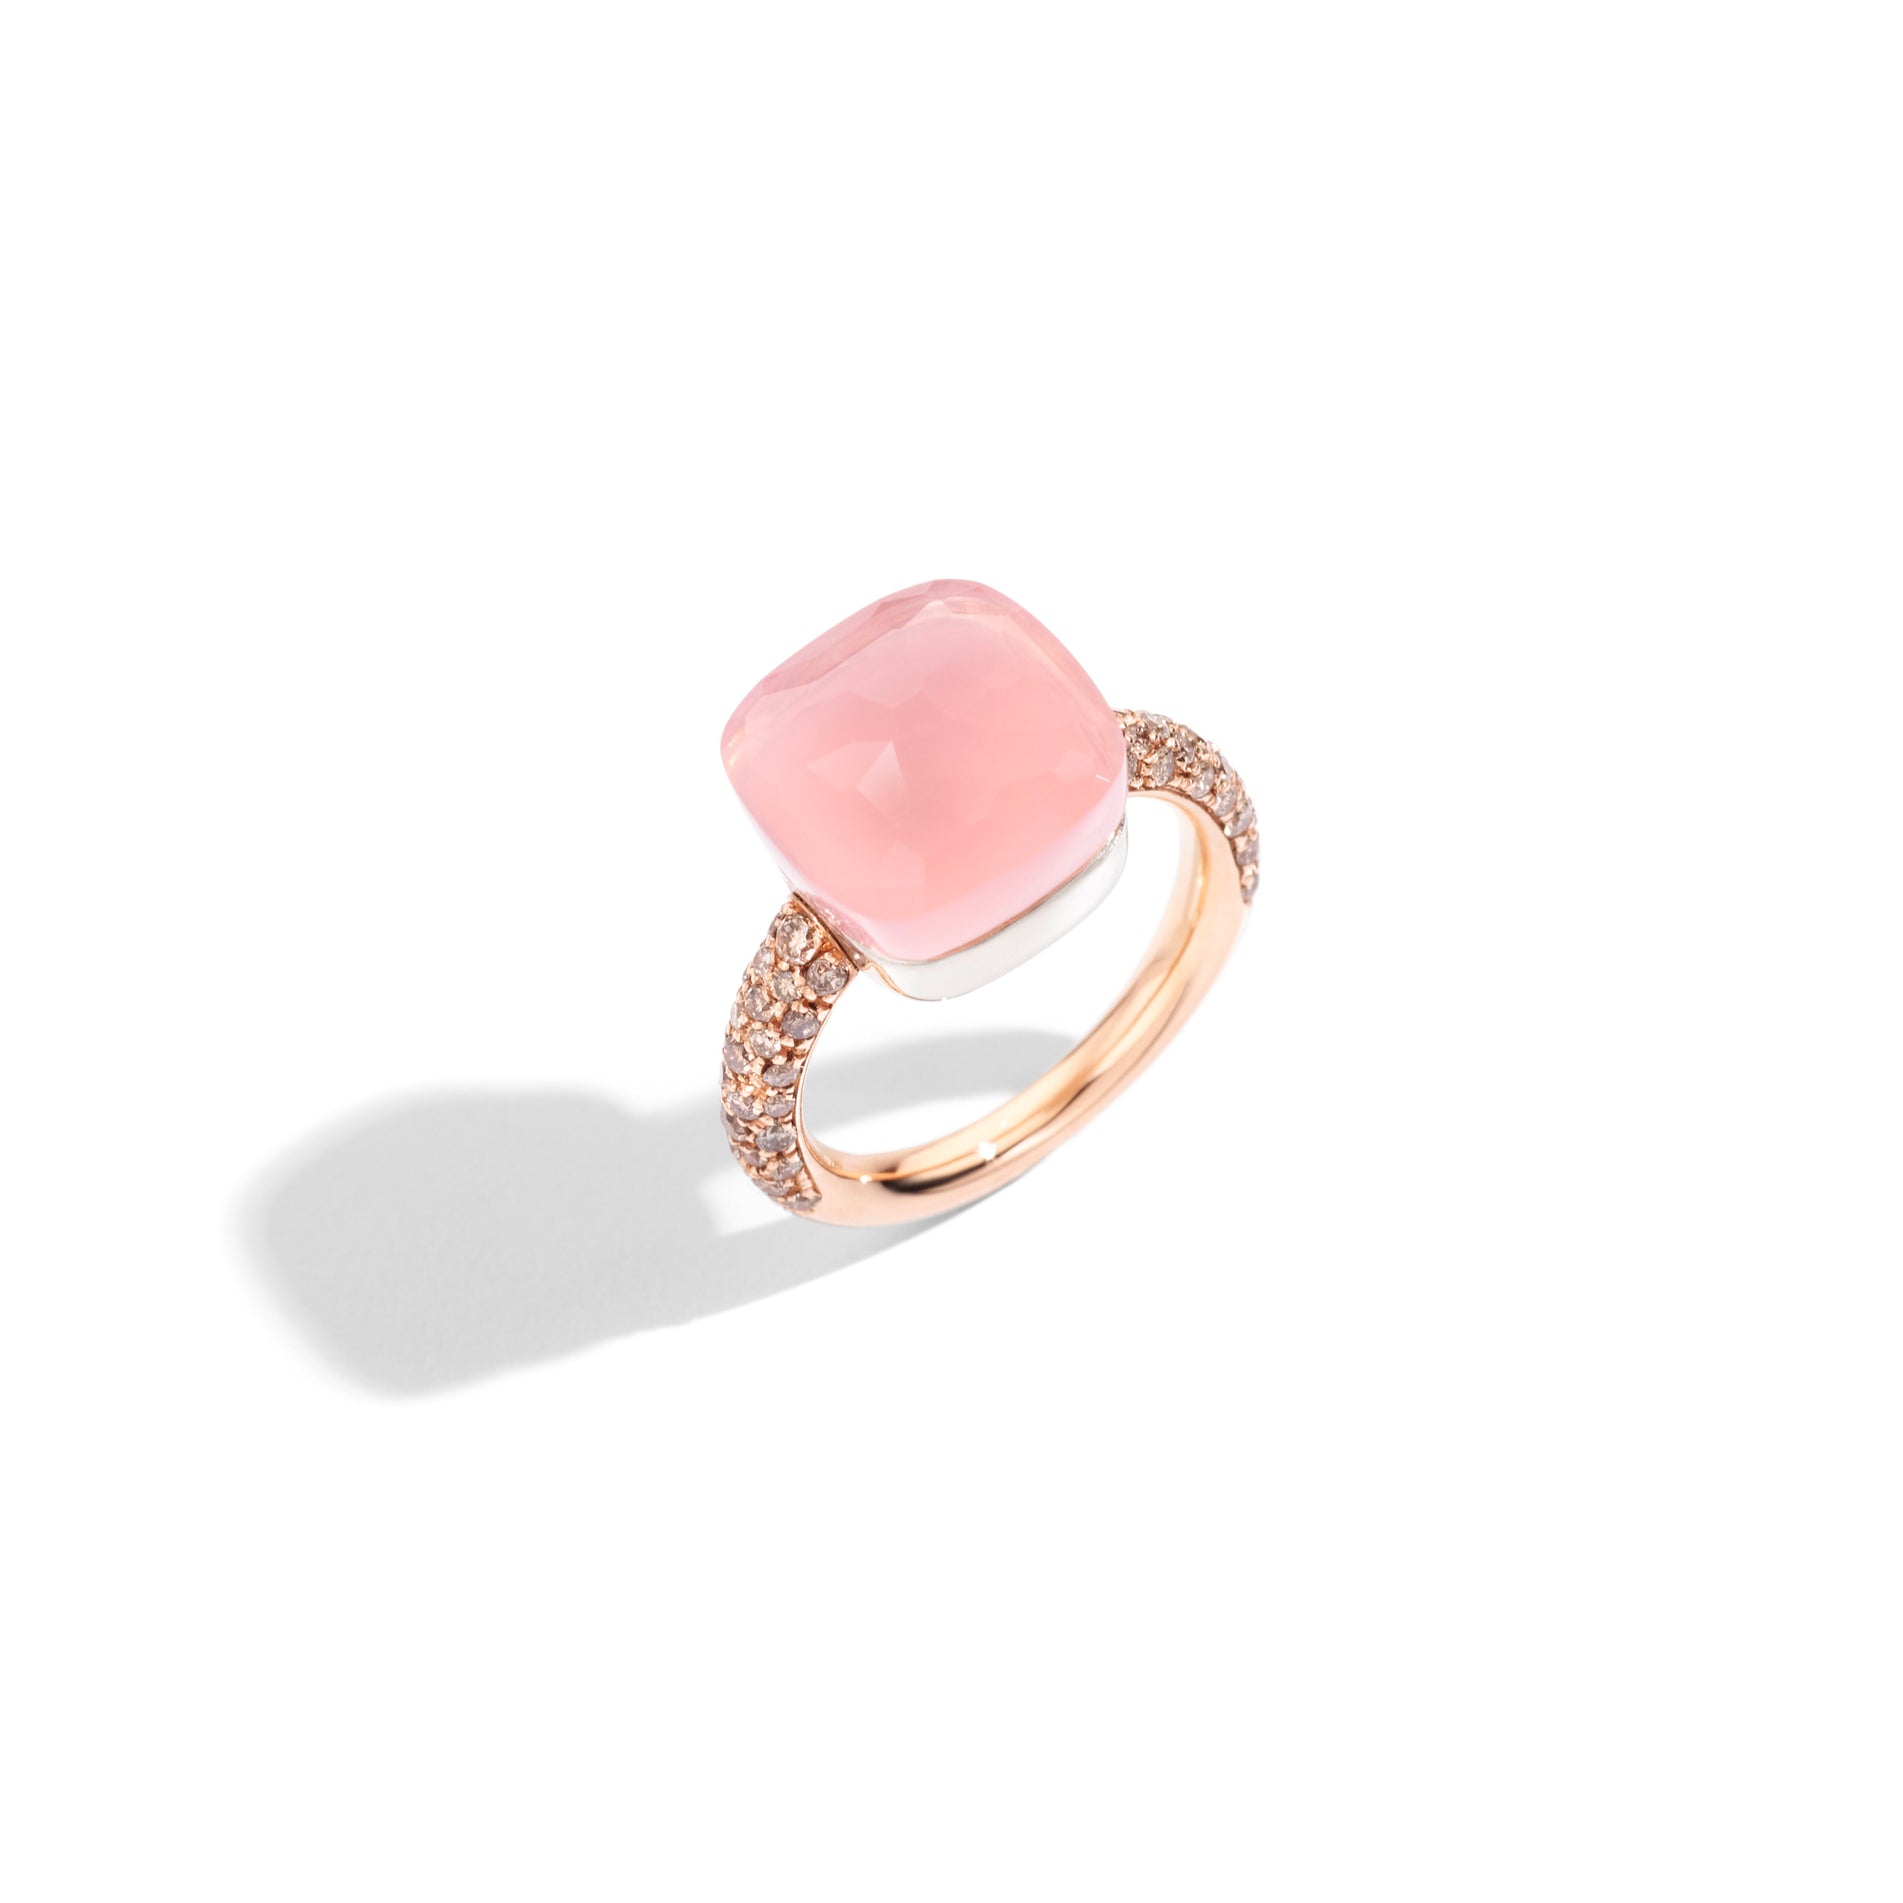 Nudo Maxi Ring in 18k Rose Gold with Rose Quartz, Chalcedony & Brown Diamonds - Orsini Jewellers NZ